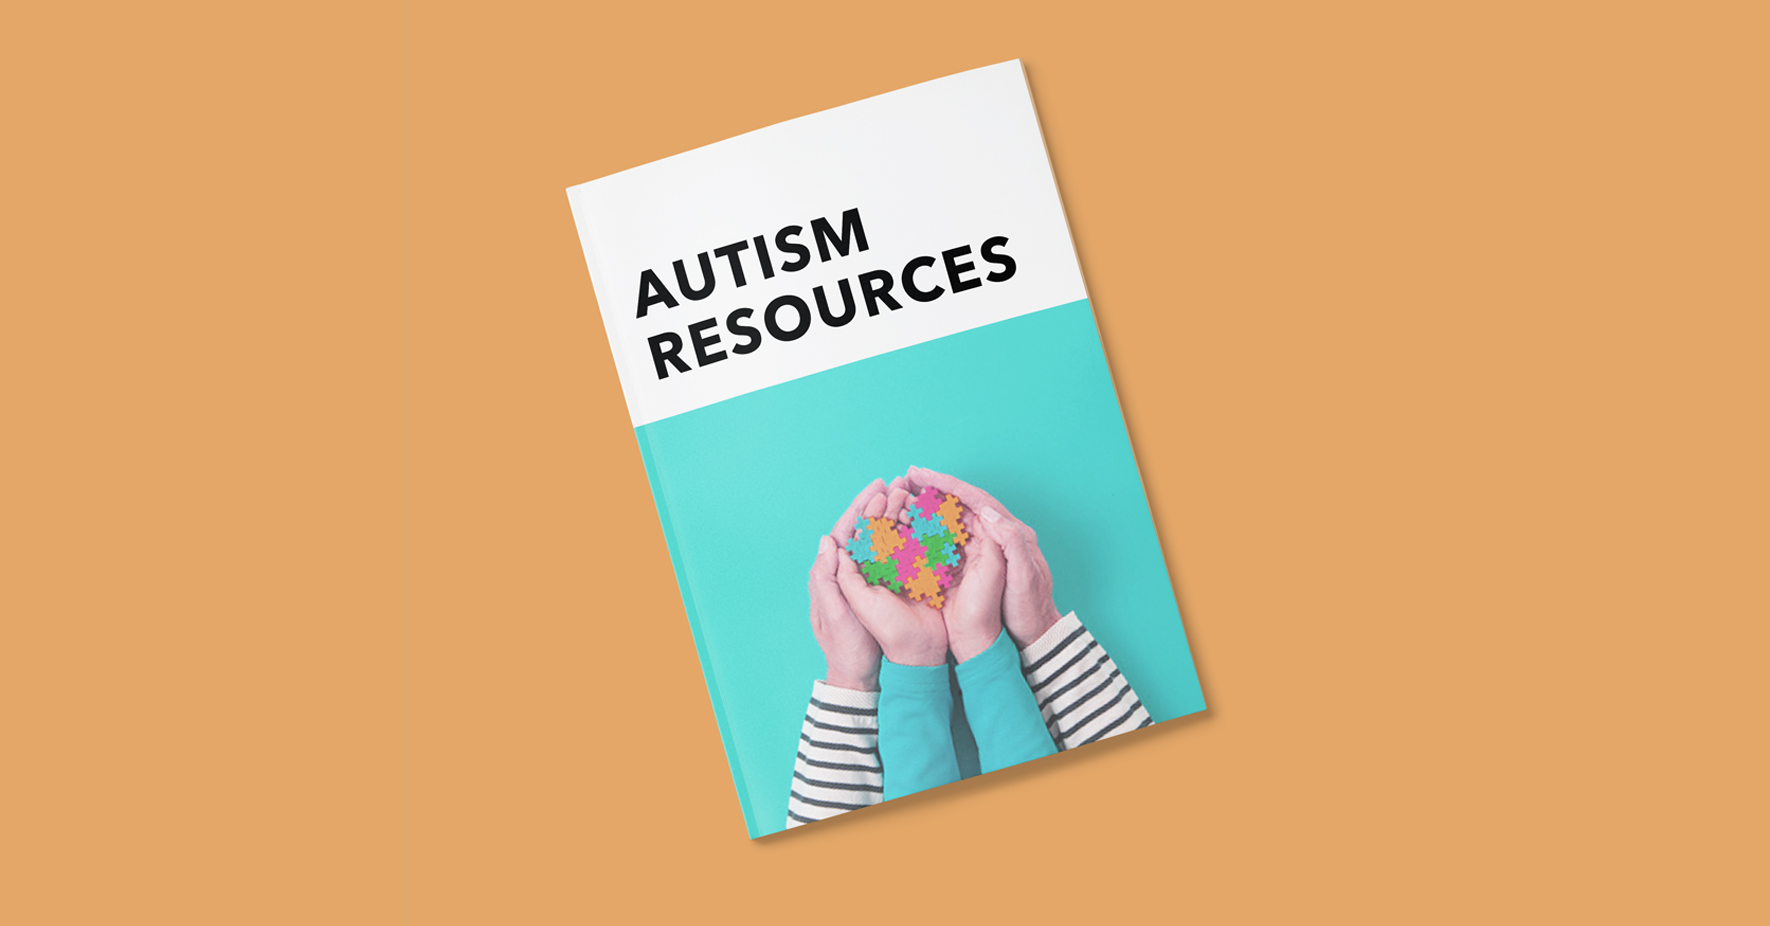 Resources for Learning About Autism